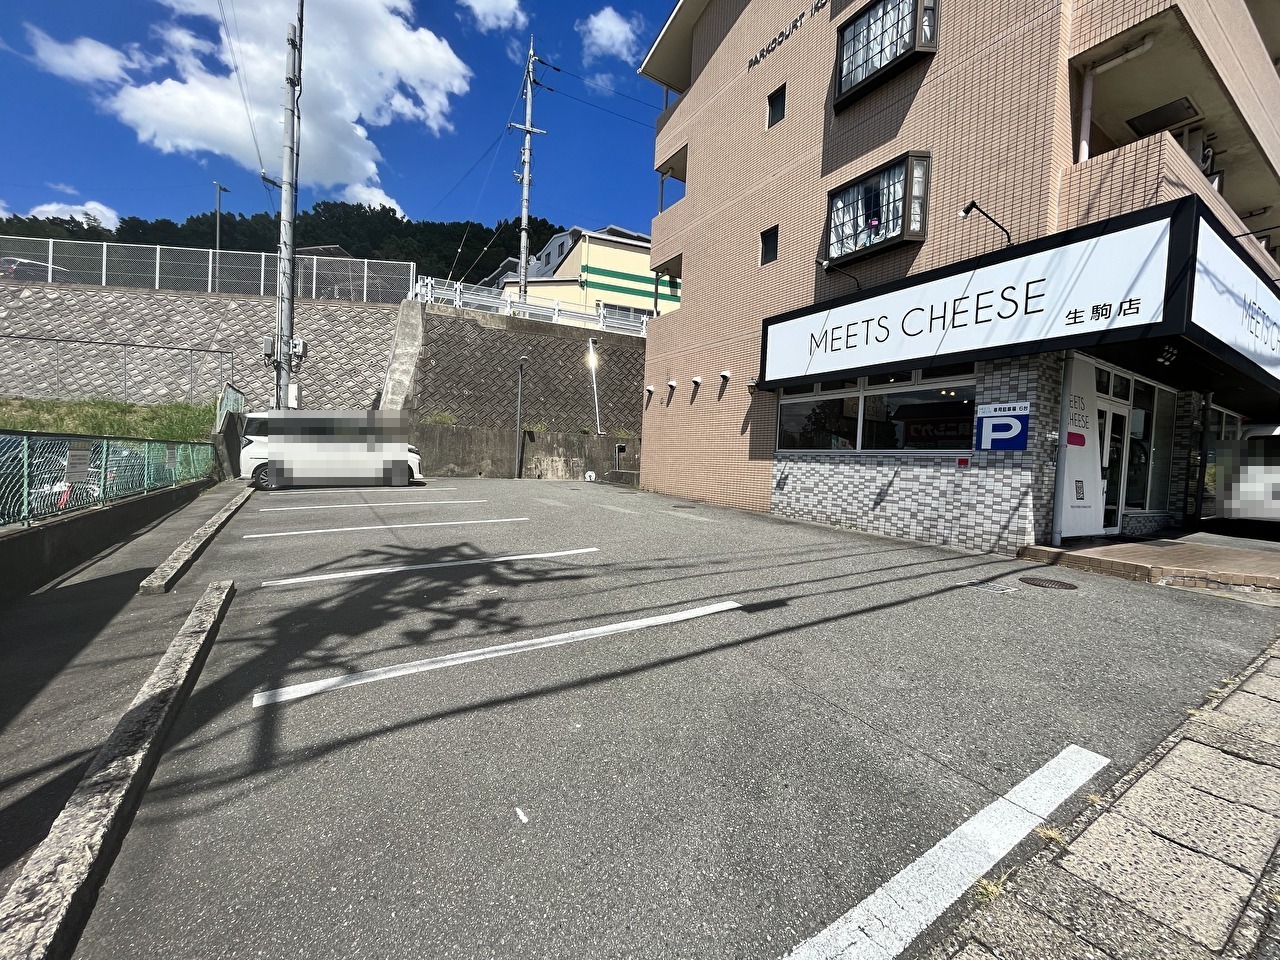 MEETS CHEESE 生駒店の駐車場